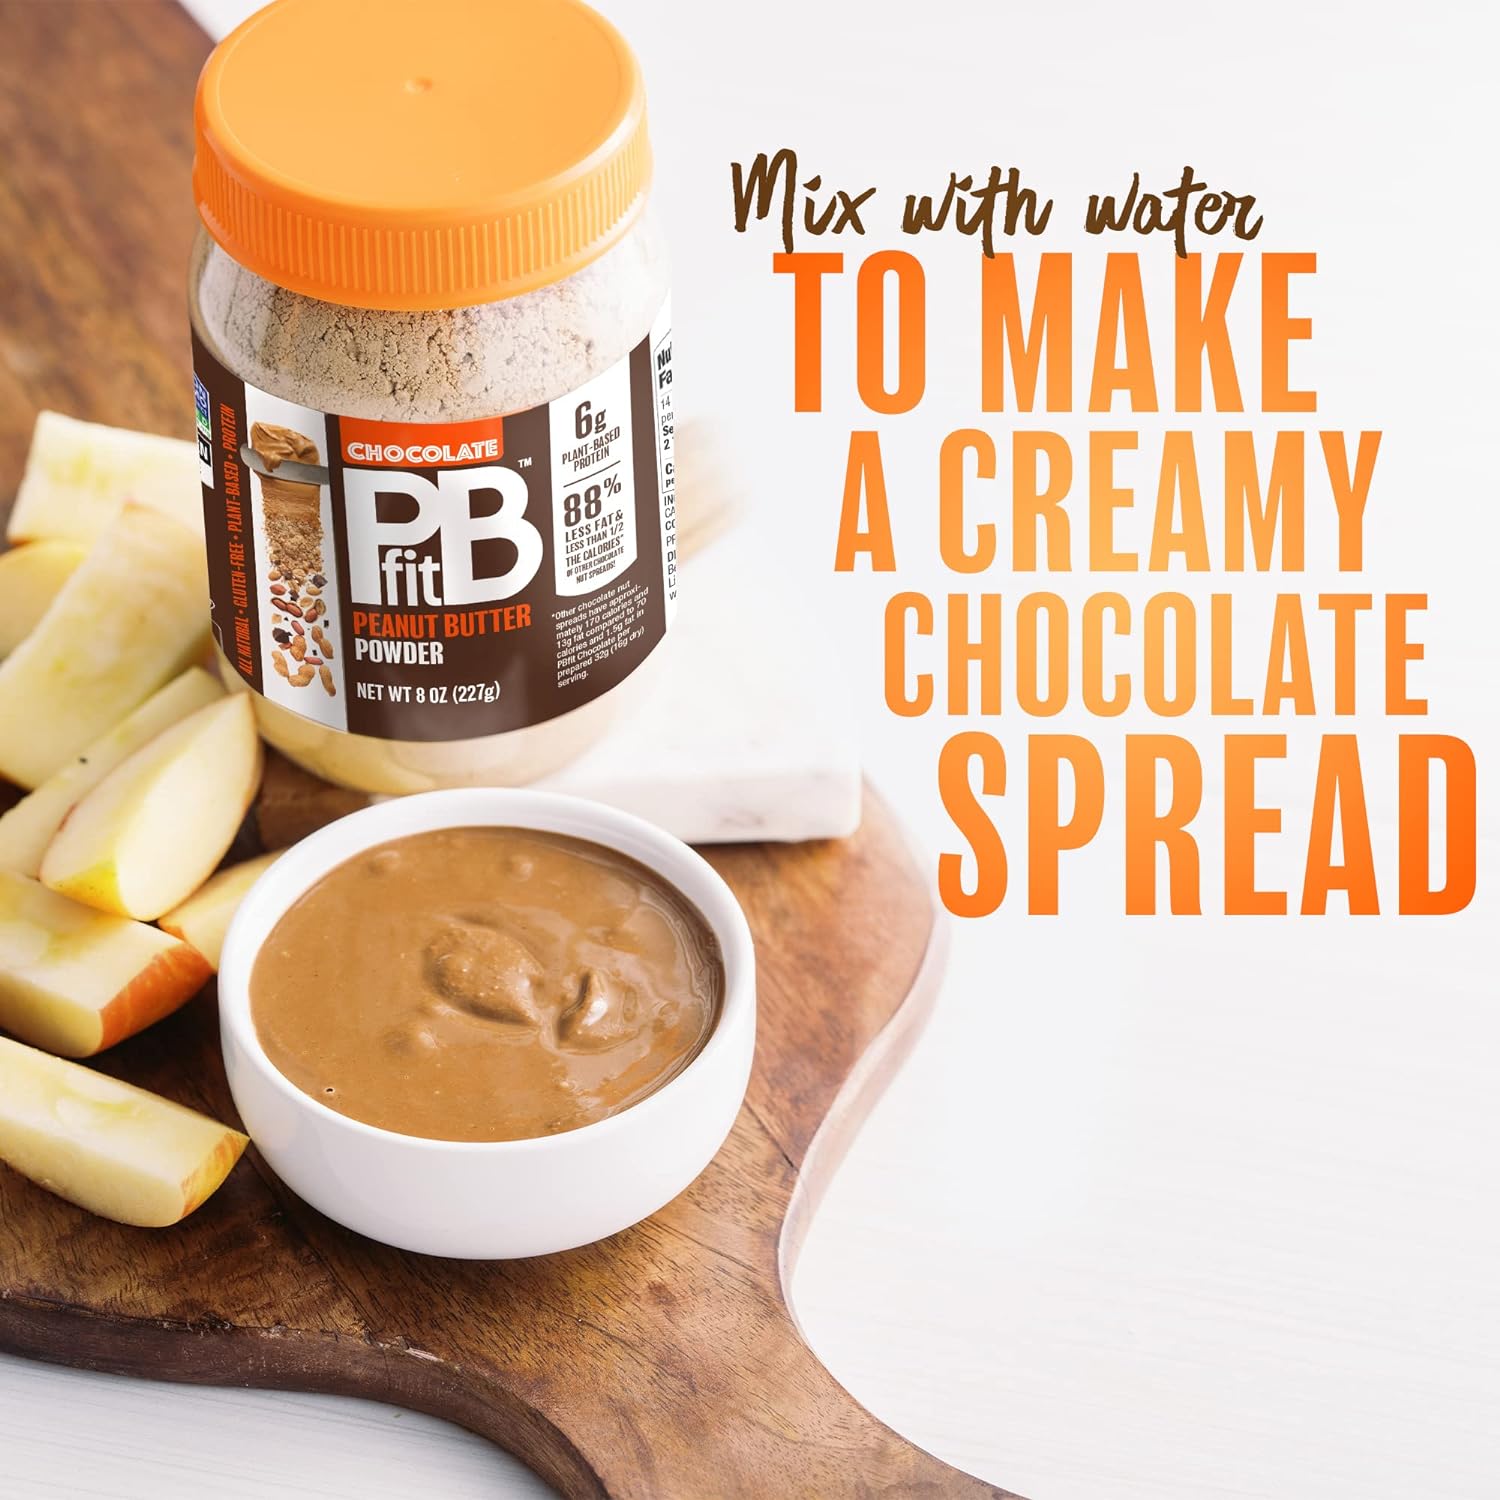 PBfit BetterBody Foods All-Natural Peanut Butter Powder, Chocolate, 8-Oz. as low as $5.69 After Coupon when you buy 4 (Reg. $10.34) + Free Shipping – Gluten-free, 6g of Protein per serving